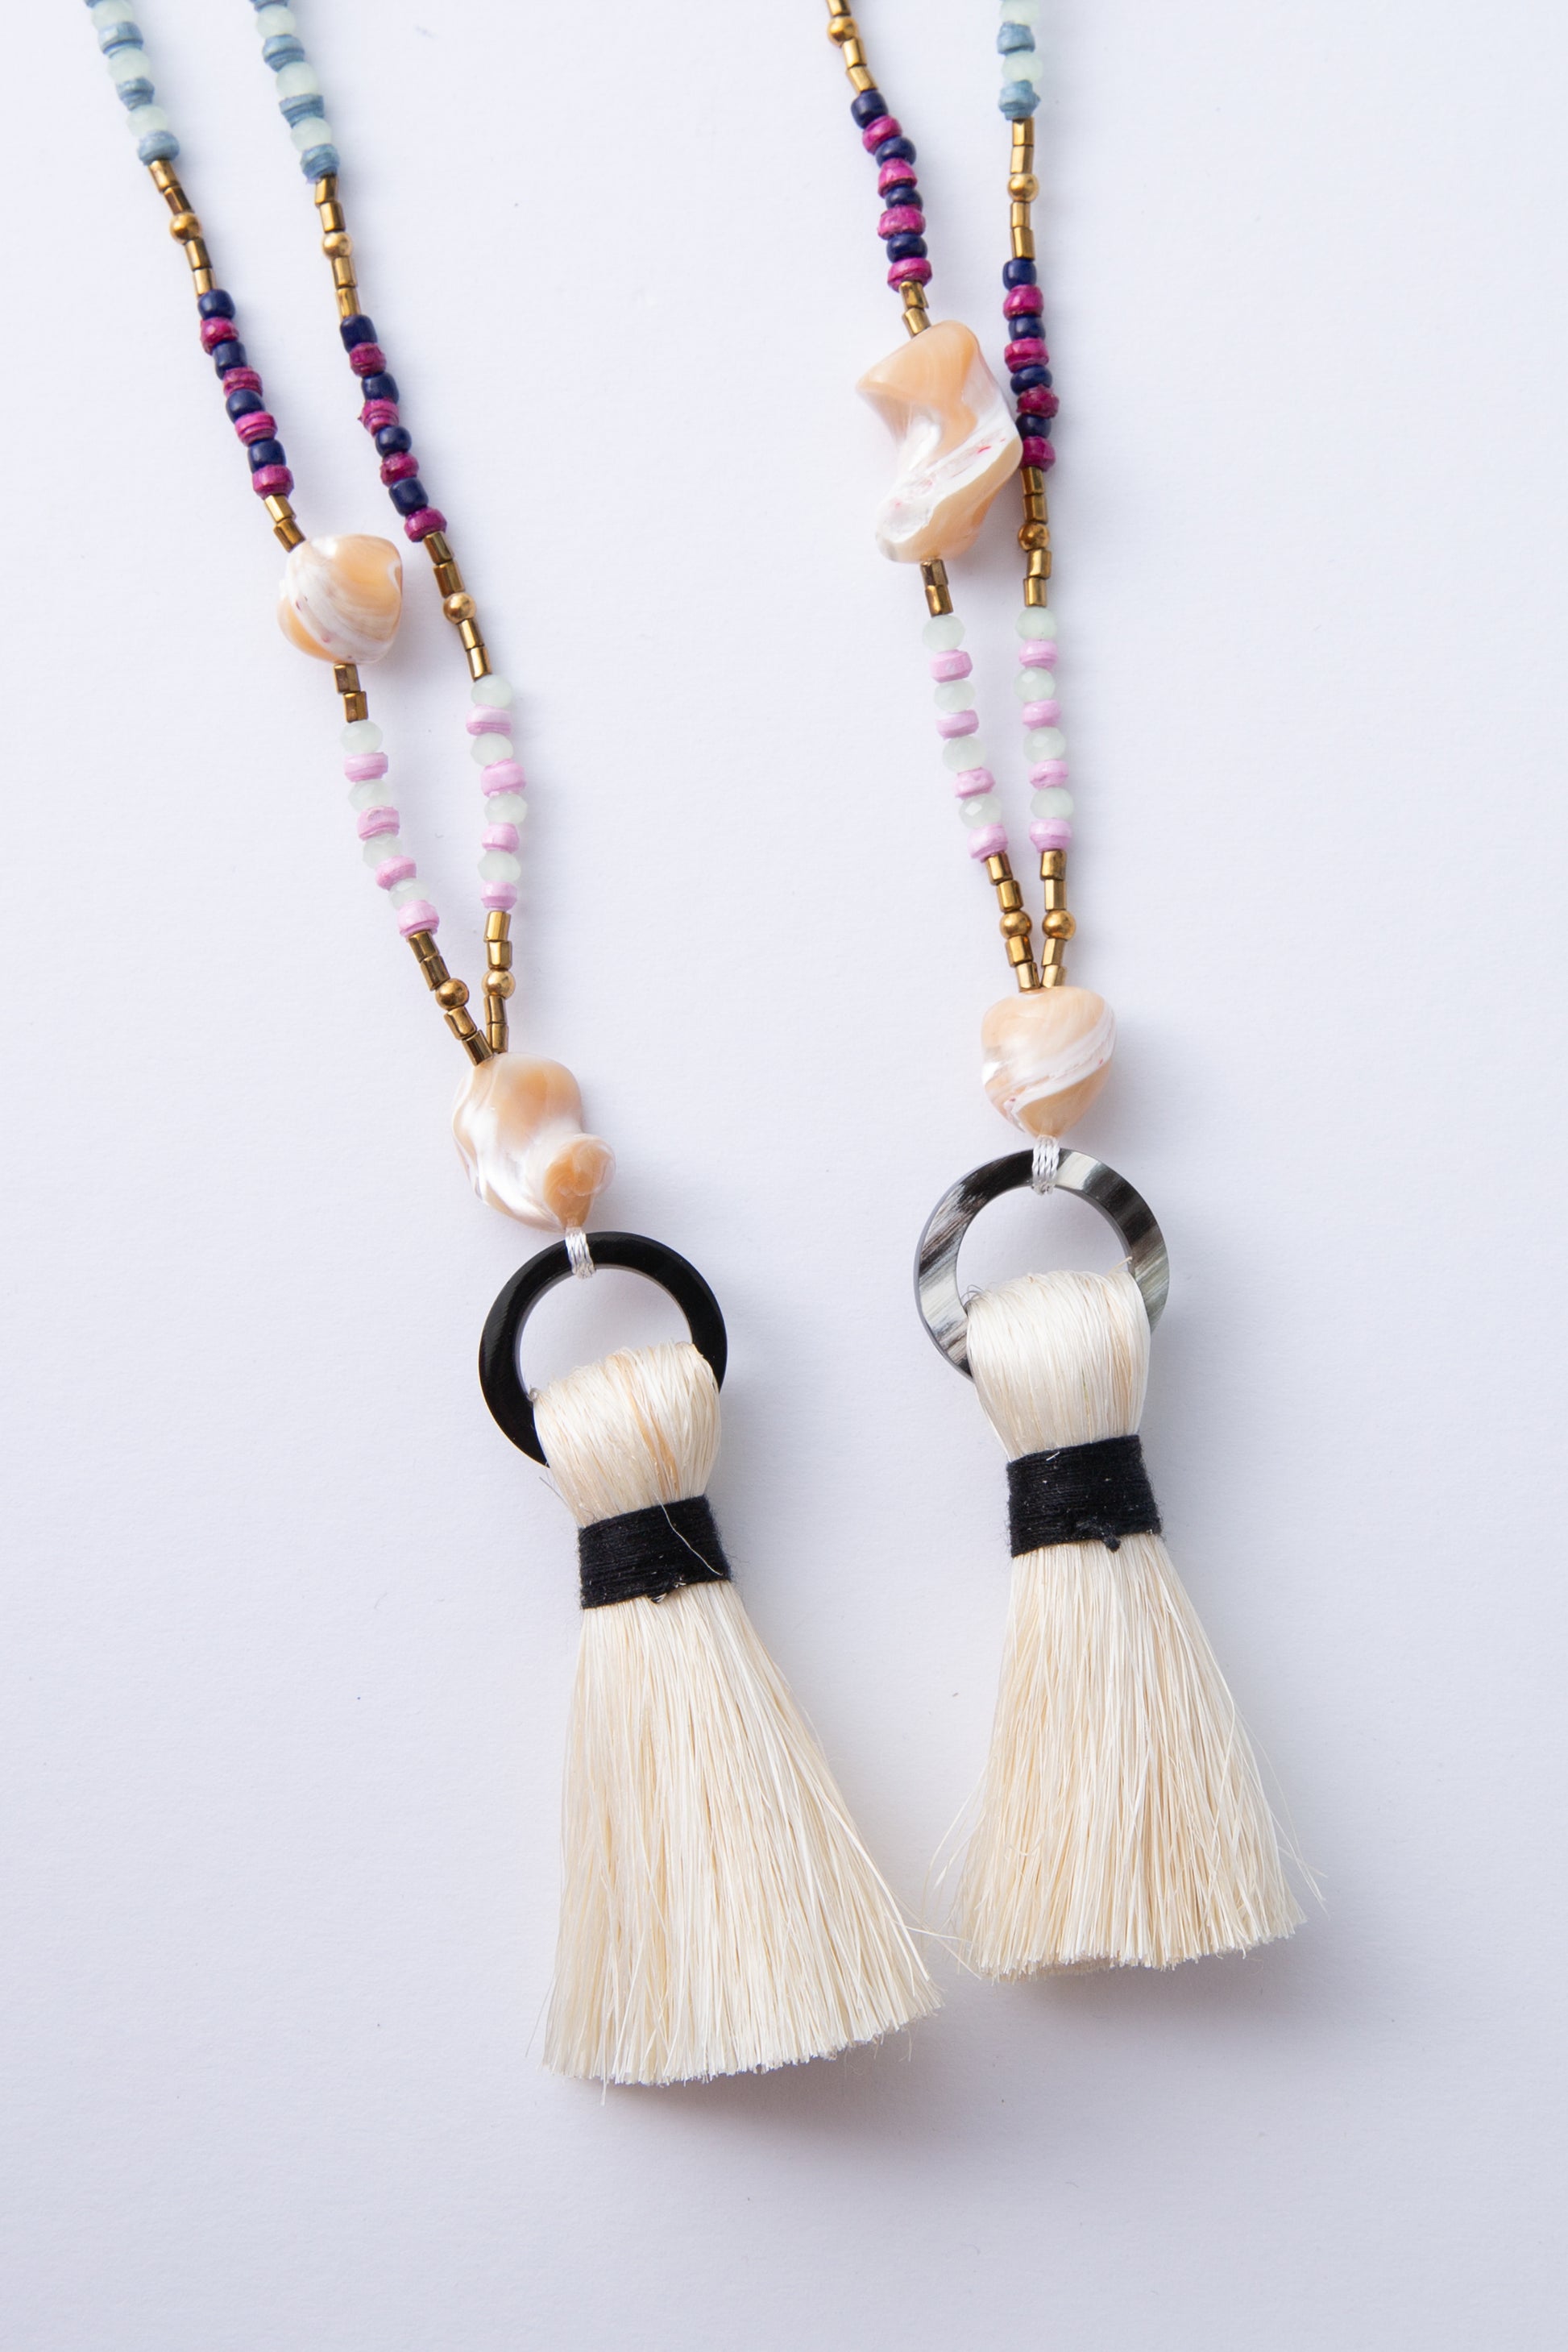 Two Dorah Necklaces are shown side by side. The horn circle at the bottom of each necklace varies in shade due to the natural material used to craft it. One is solid black, while the other is black with white streaks.